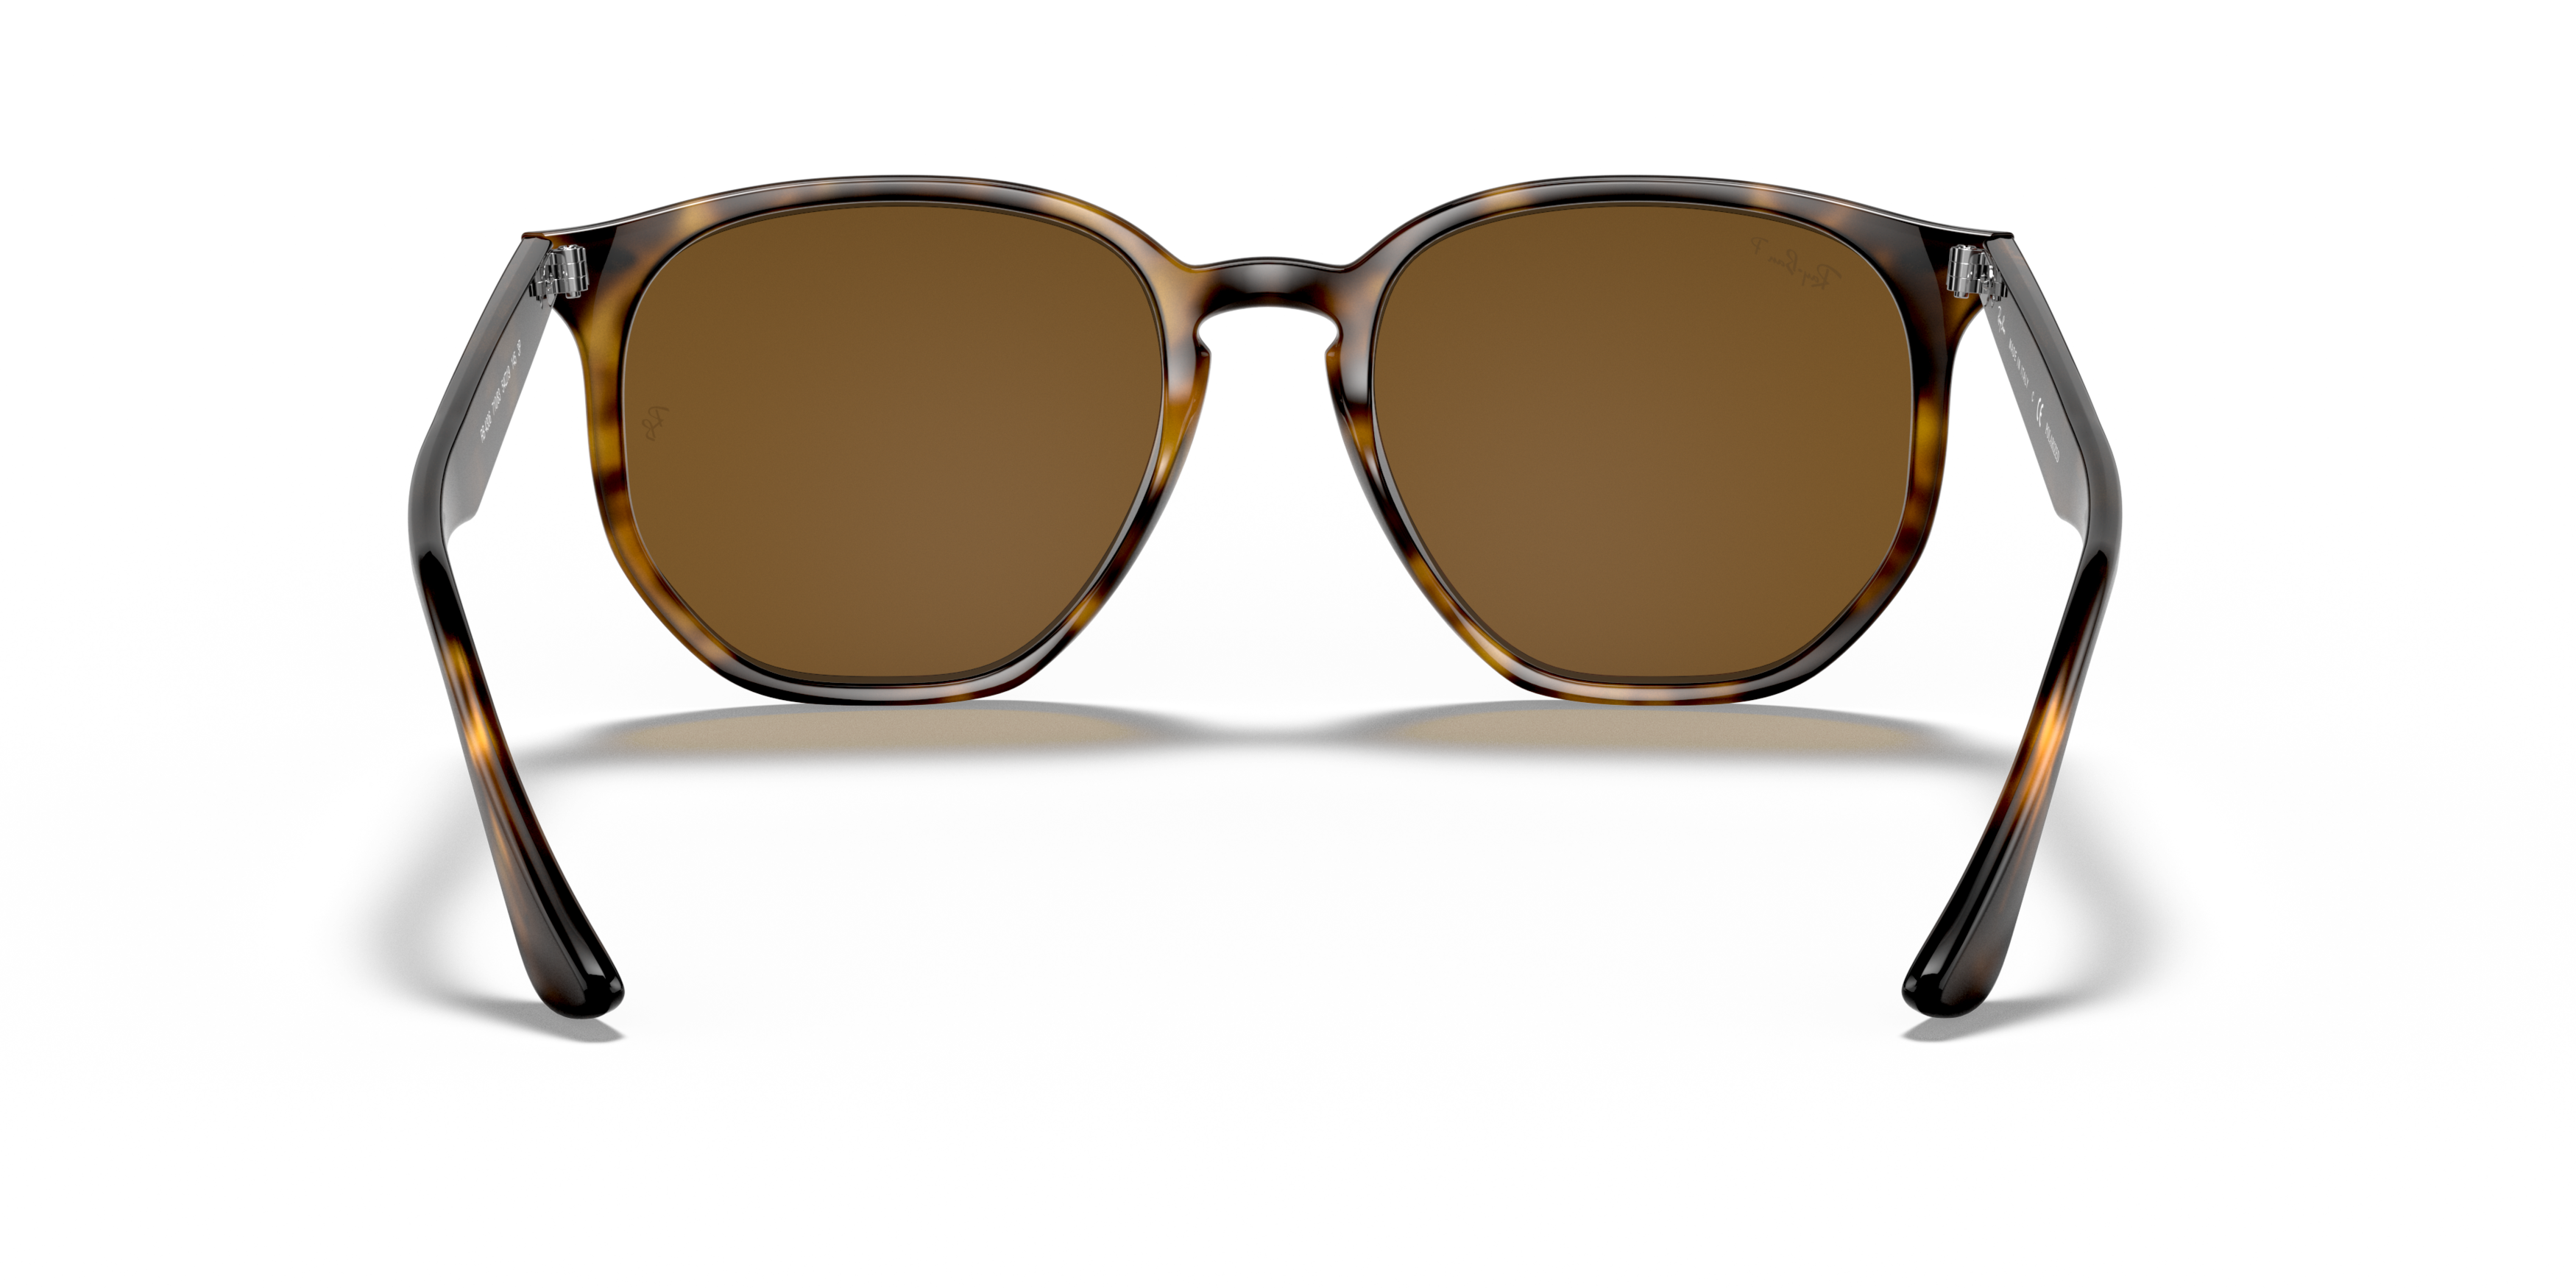 Detail02 Ray-Ban RB 4306 (710/83) Sunglasses Brown / Transparent, Tortoise Shell